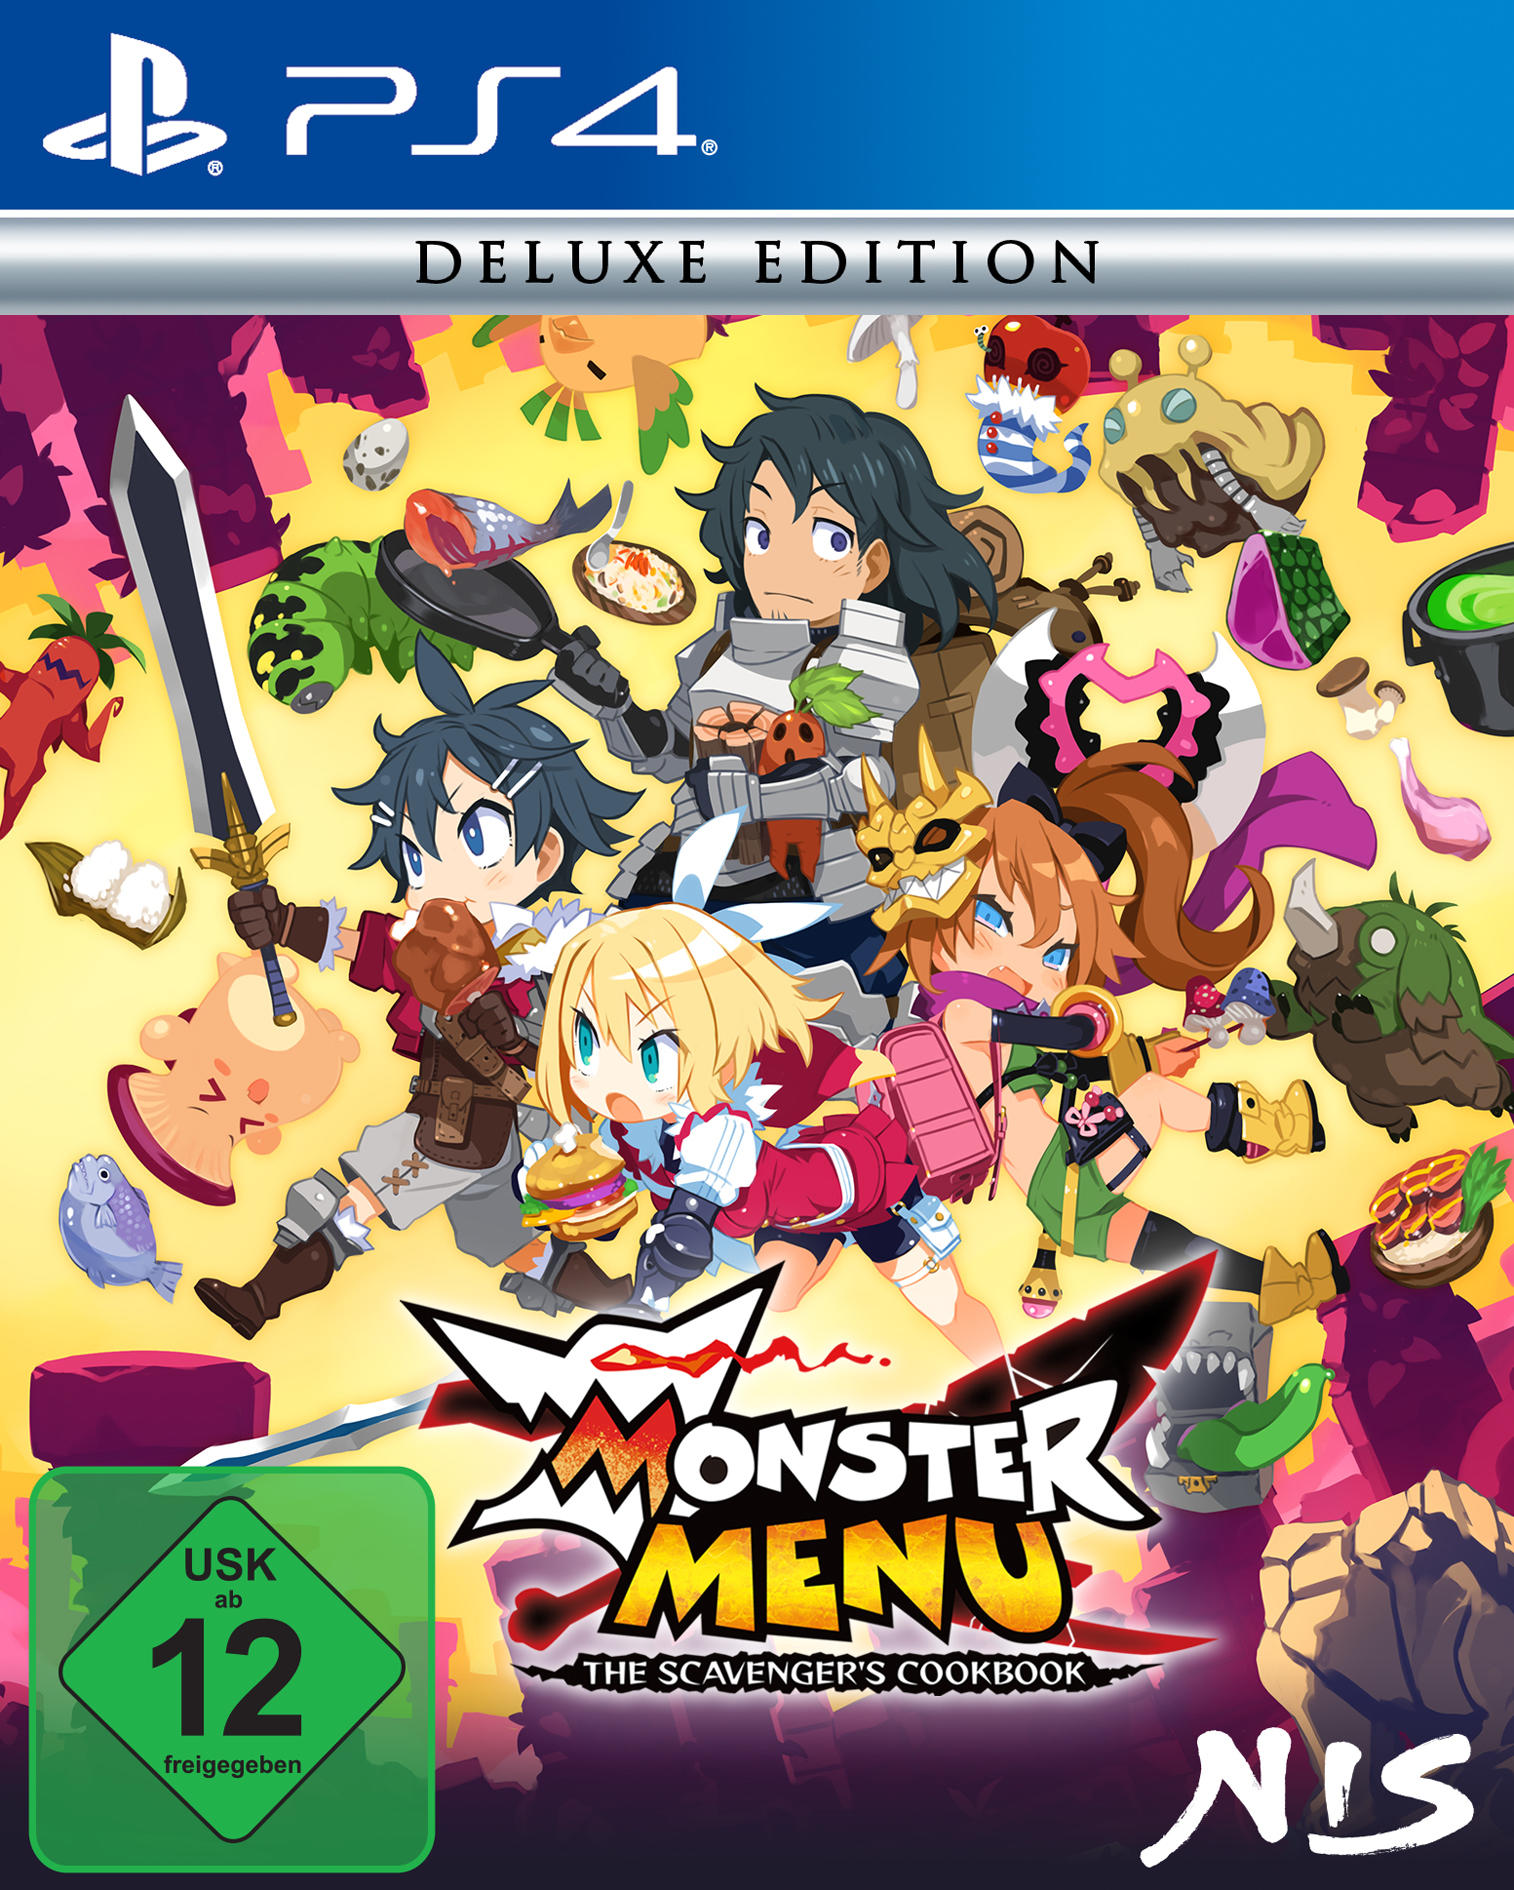 Scavenger\'s Deluxe Menu: 4] Edition - Cookbook The [PlayStation Monster -